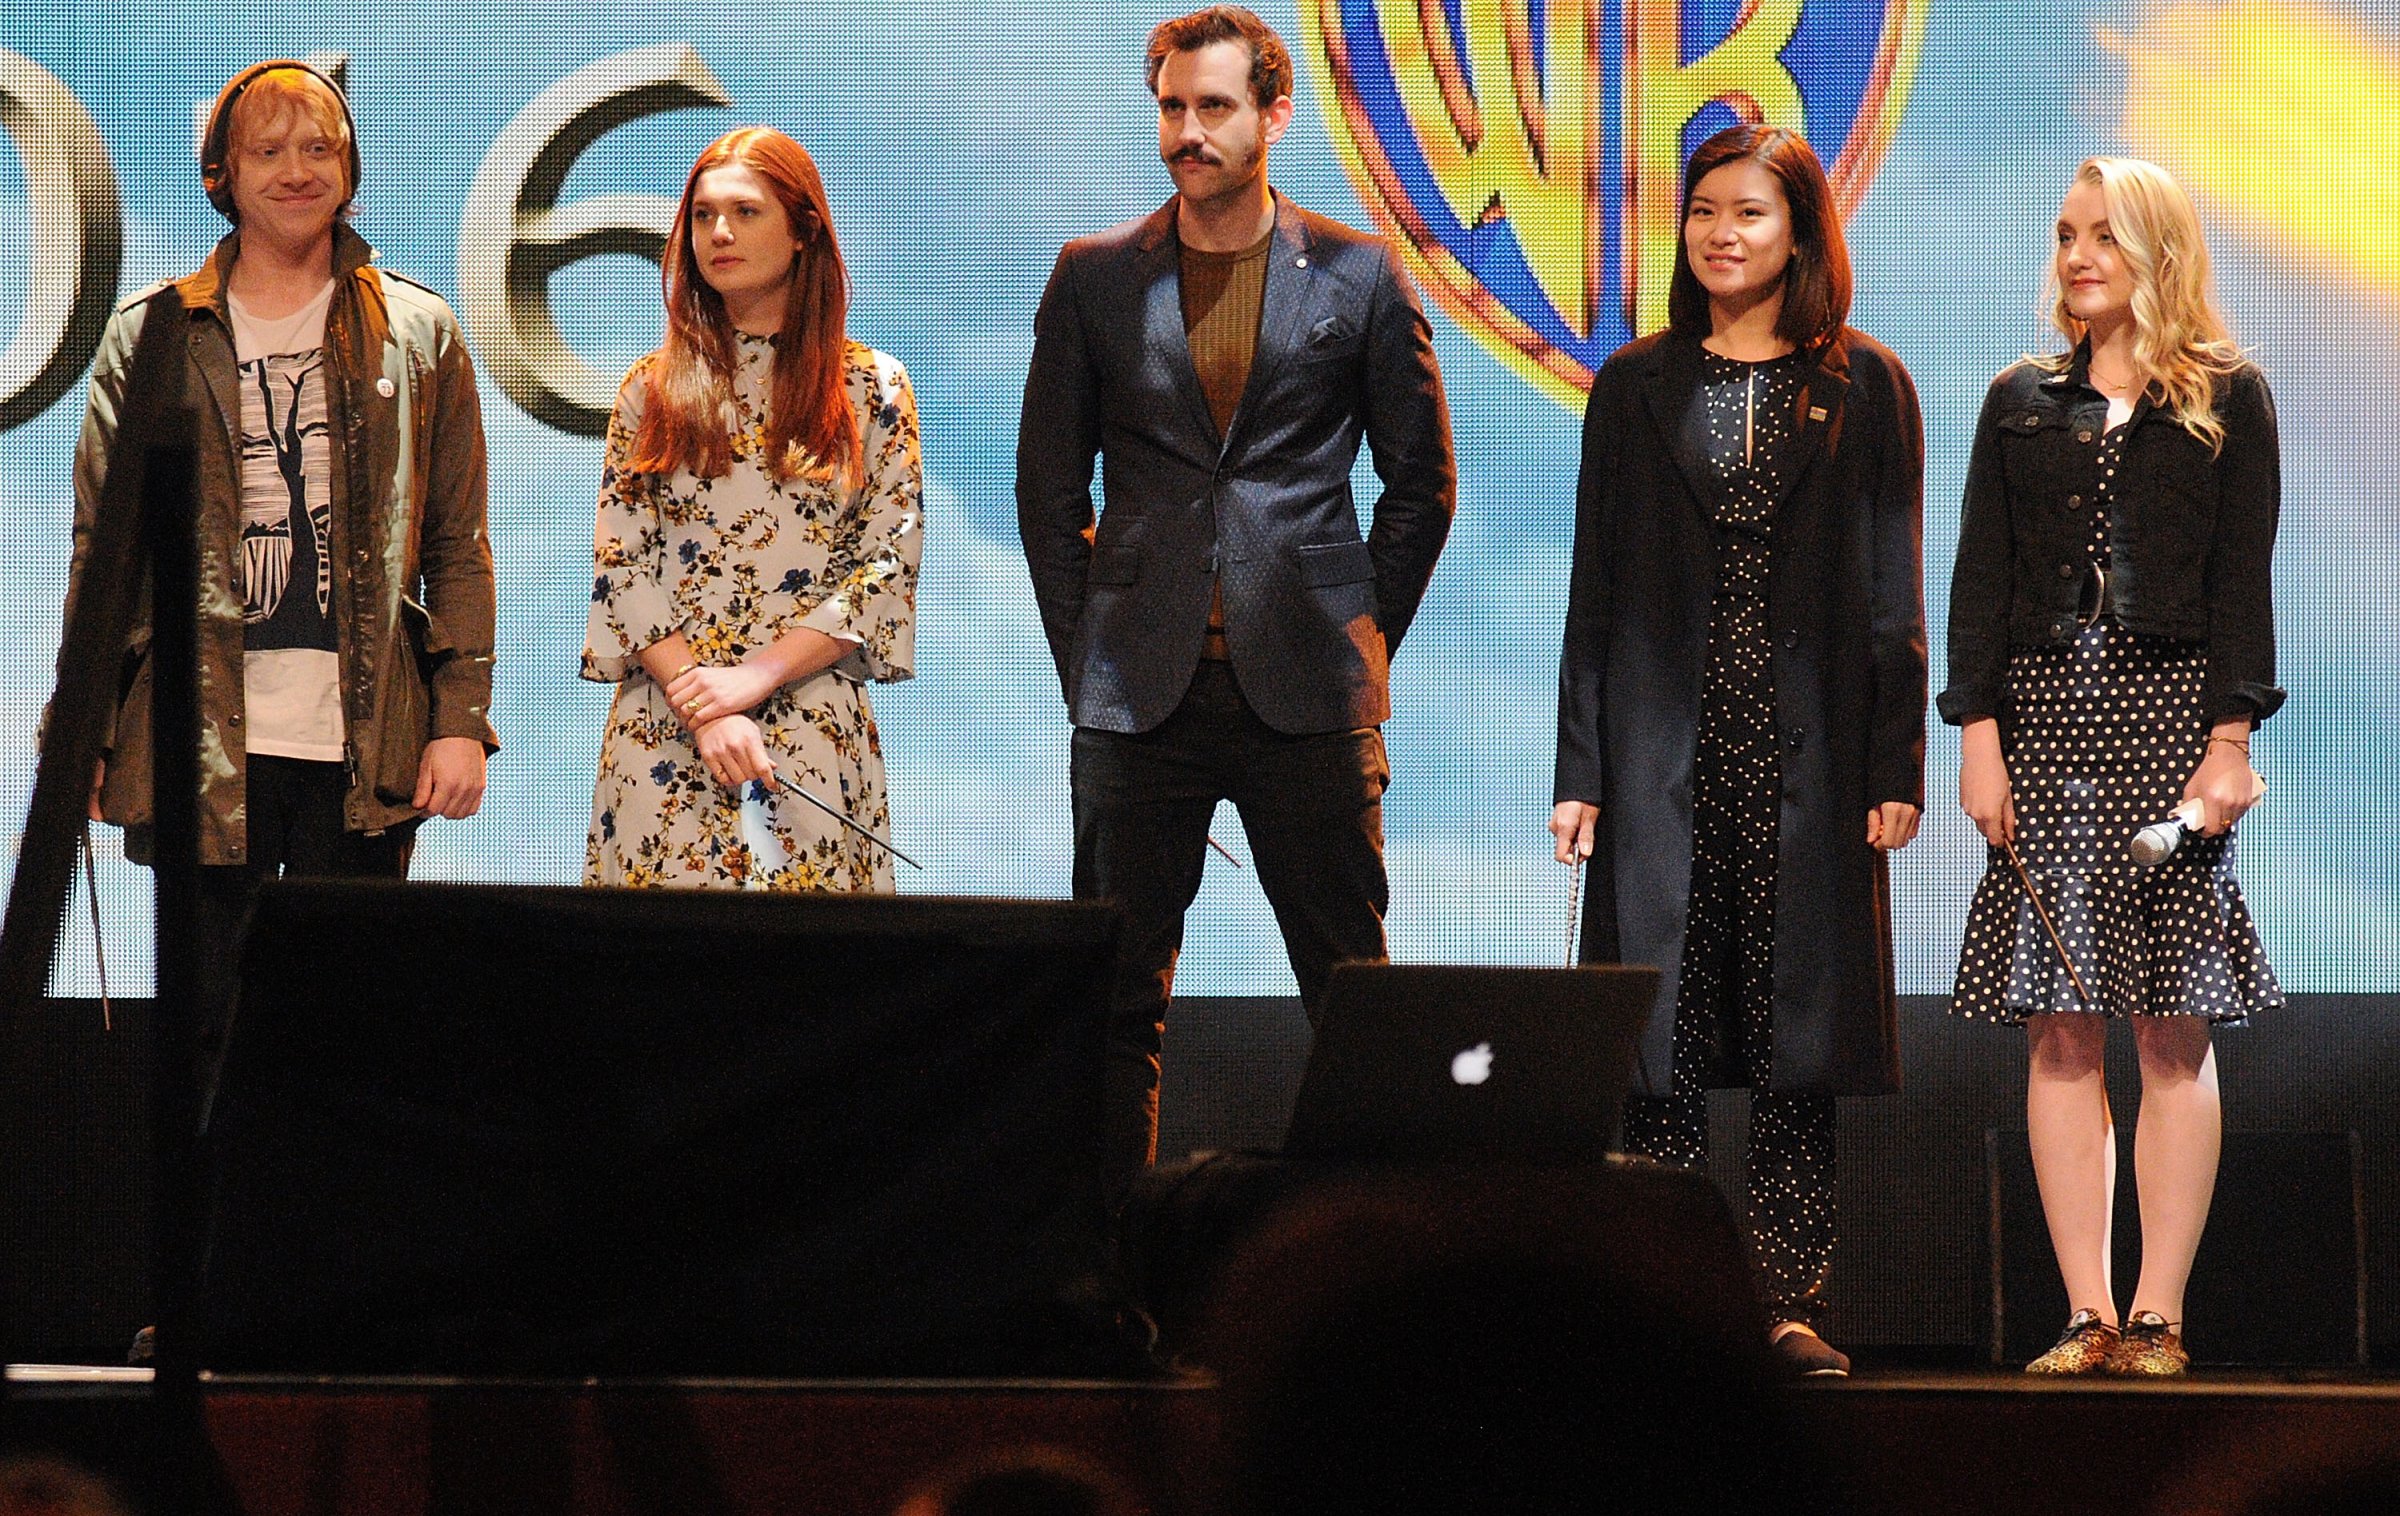 Harry Potter' cast members (L-R) Rupert Grint, Bonnie Wright, Matthew Lewis, Katie Leung and Evanna Lynch attend the 3rd Annual Celebration Of Harry Potter at Universal Orlando on Jan.29, 2016 in Orlando, Florida.